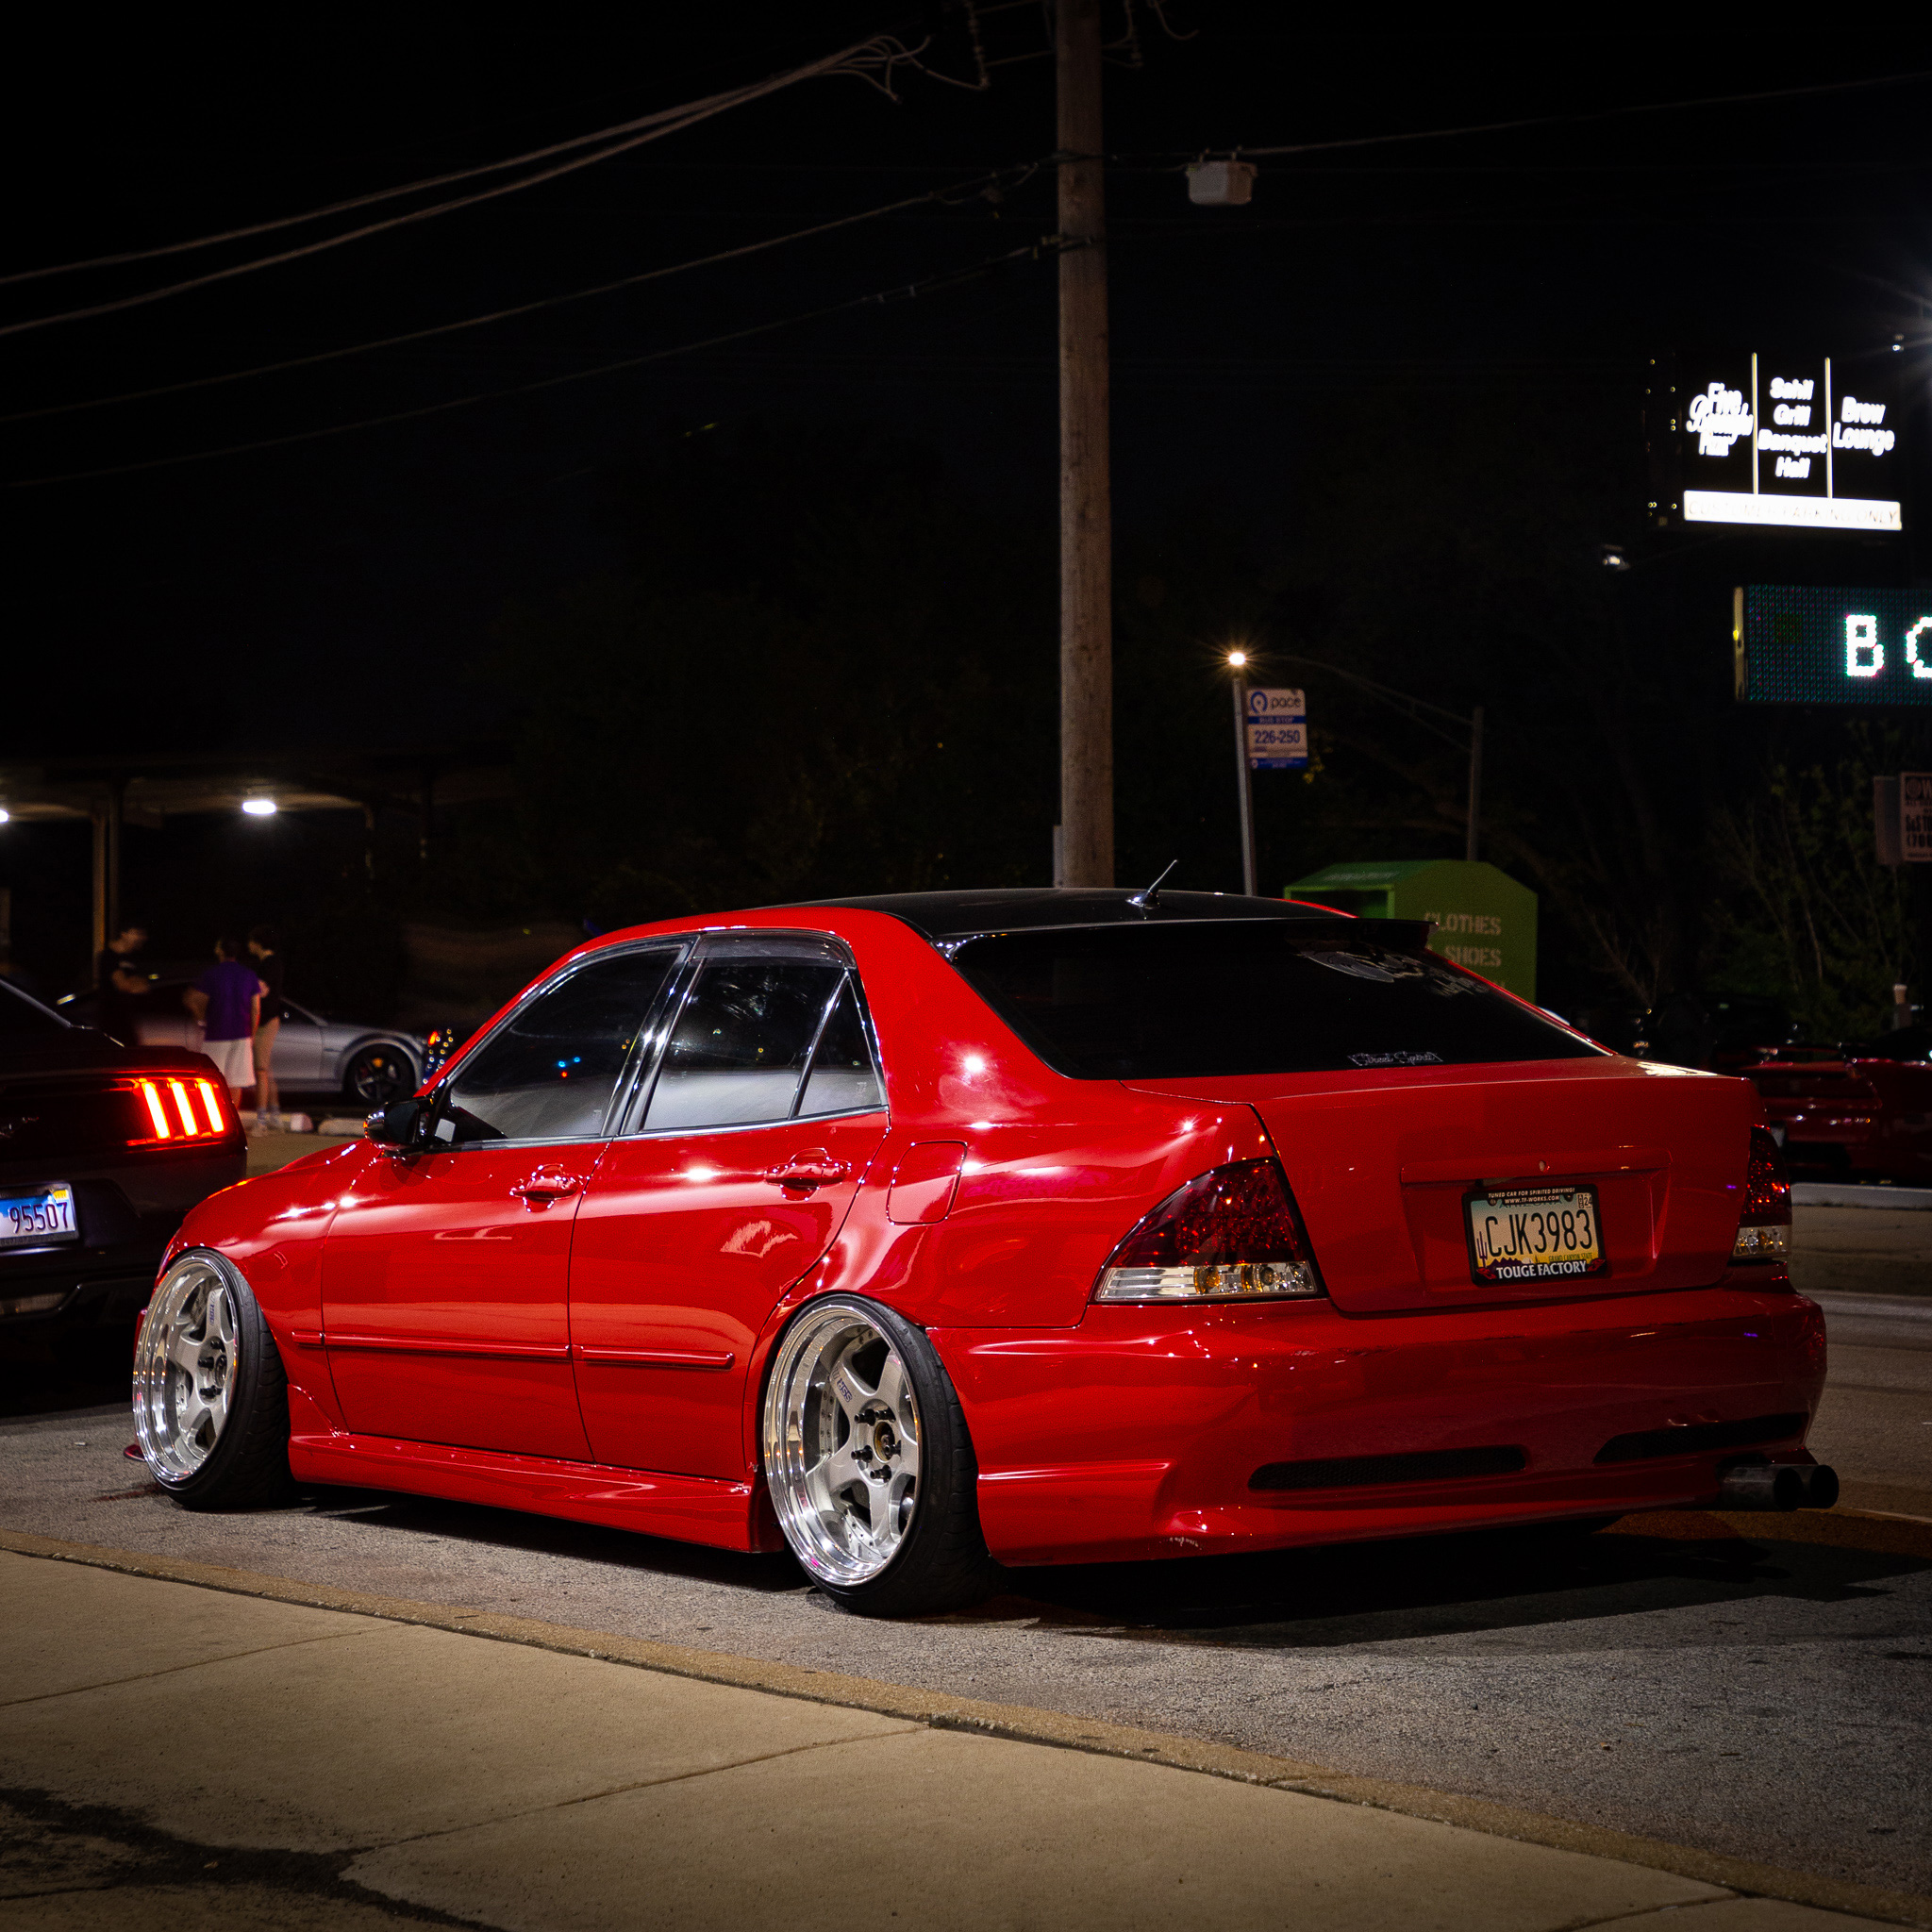 Red Lexus IS300 Parked at Night